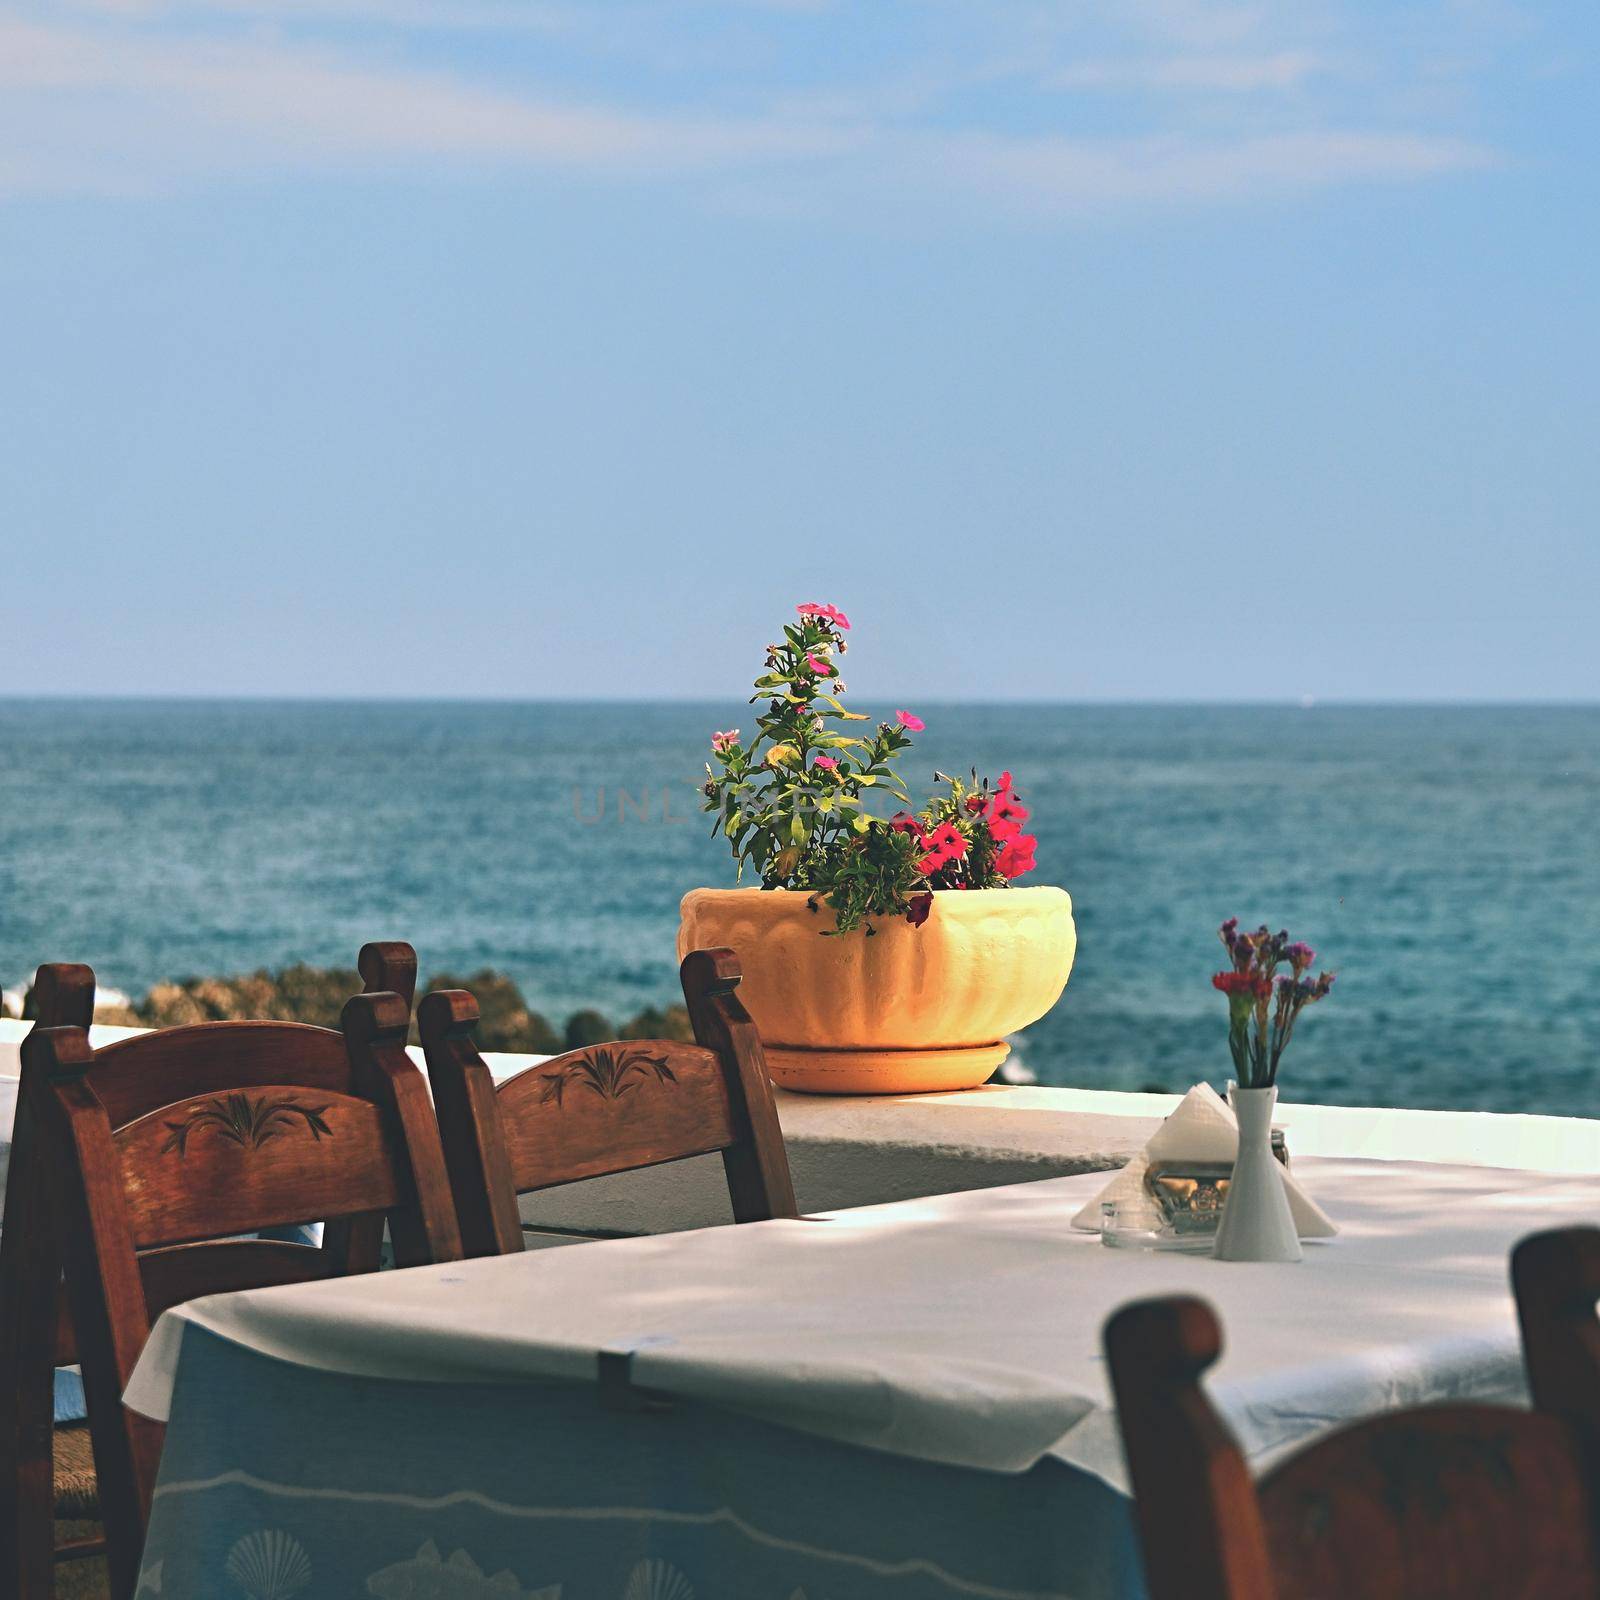 A covered table in a Greek tavern and a sea. Summer background for travel and holidays.